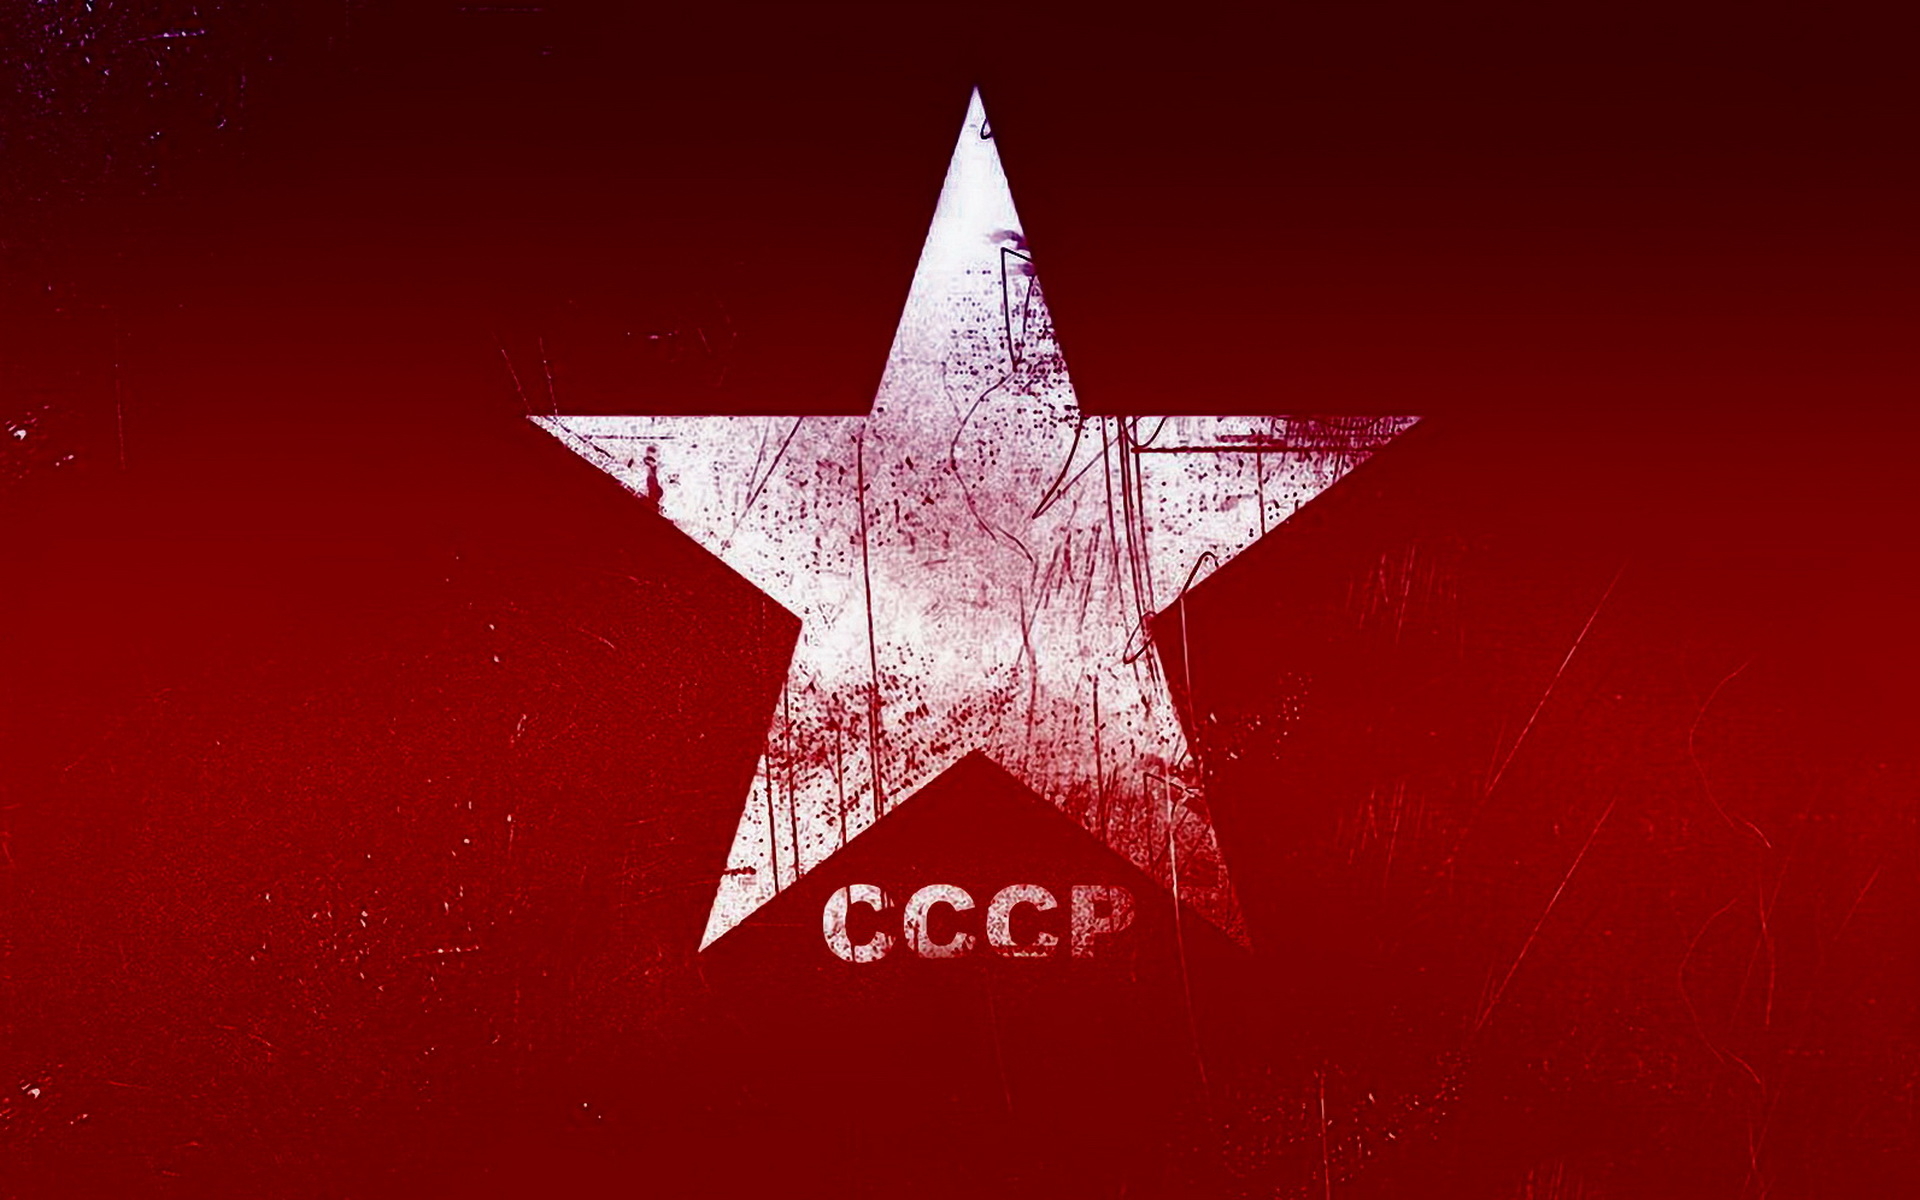 Ussr Wallpaper And Image Pictures Photos